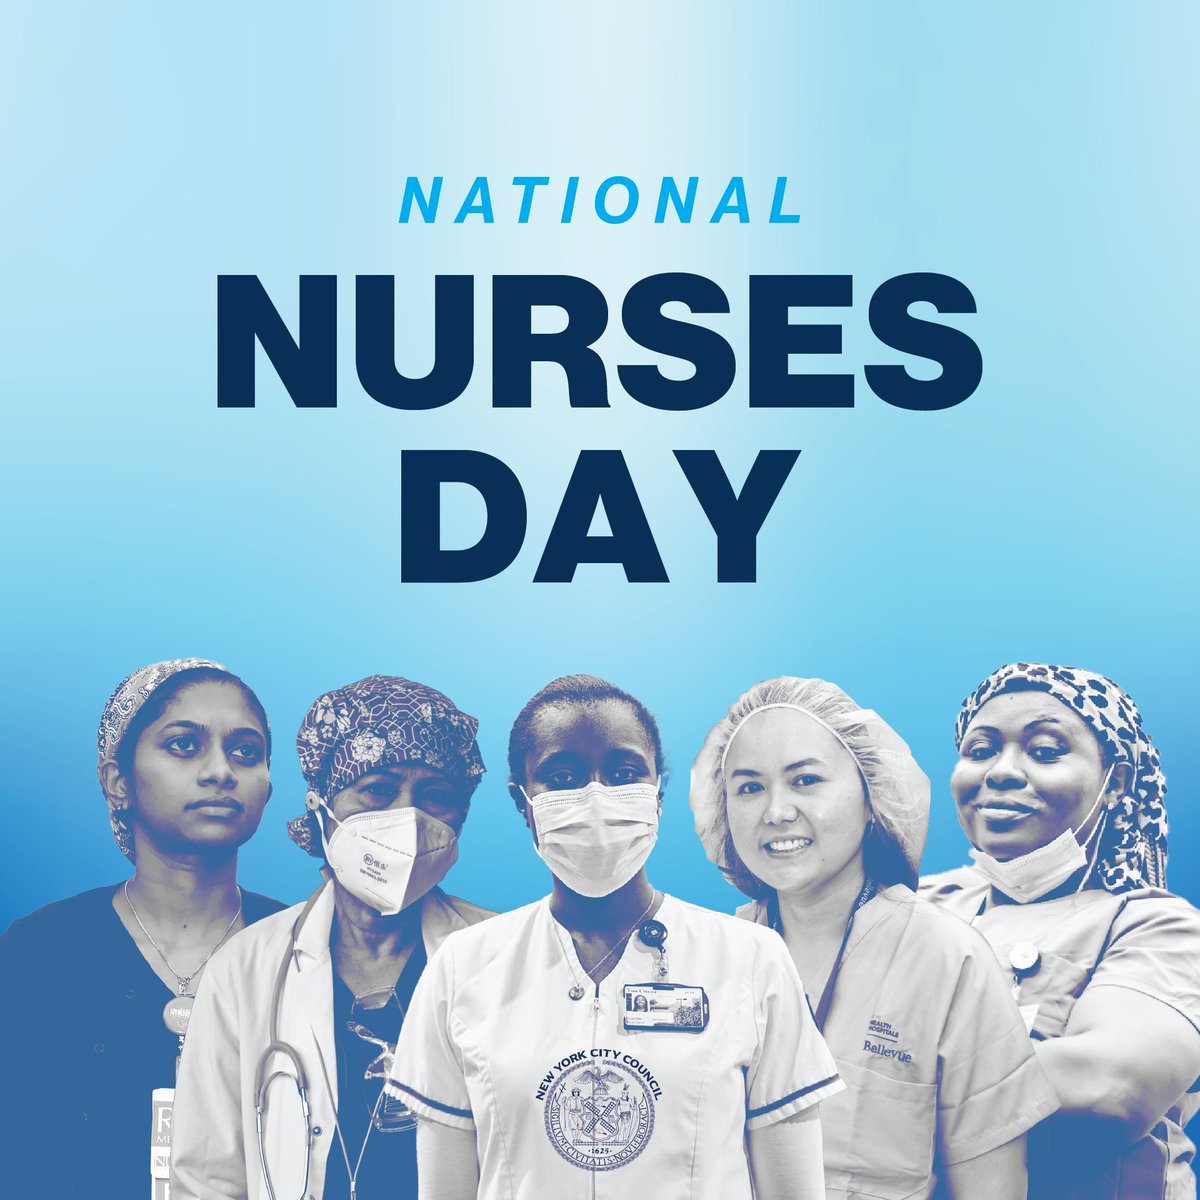 It's National Nurses Day! 🩺 Thank you to all the nurses and essential healthcare workers who keep New Yorkers healthy and safe.